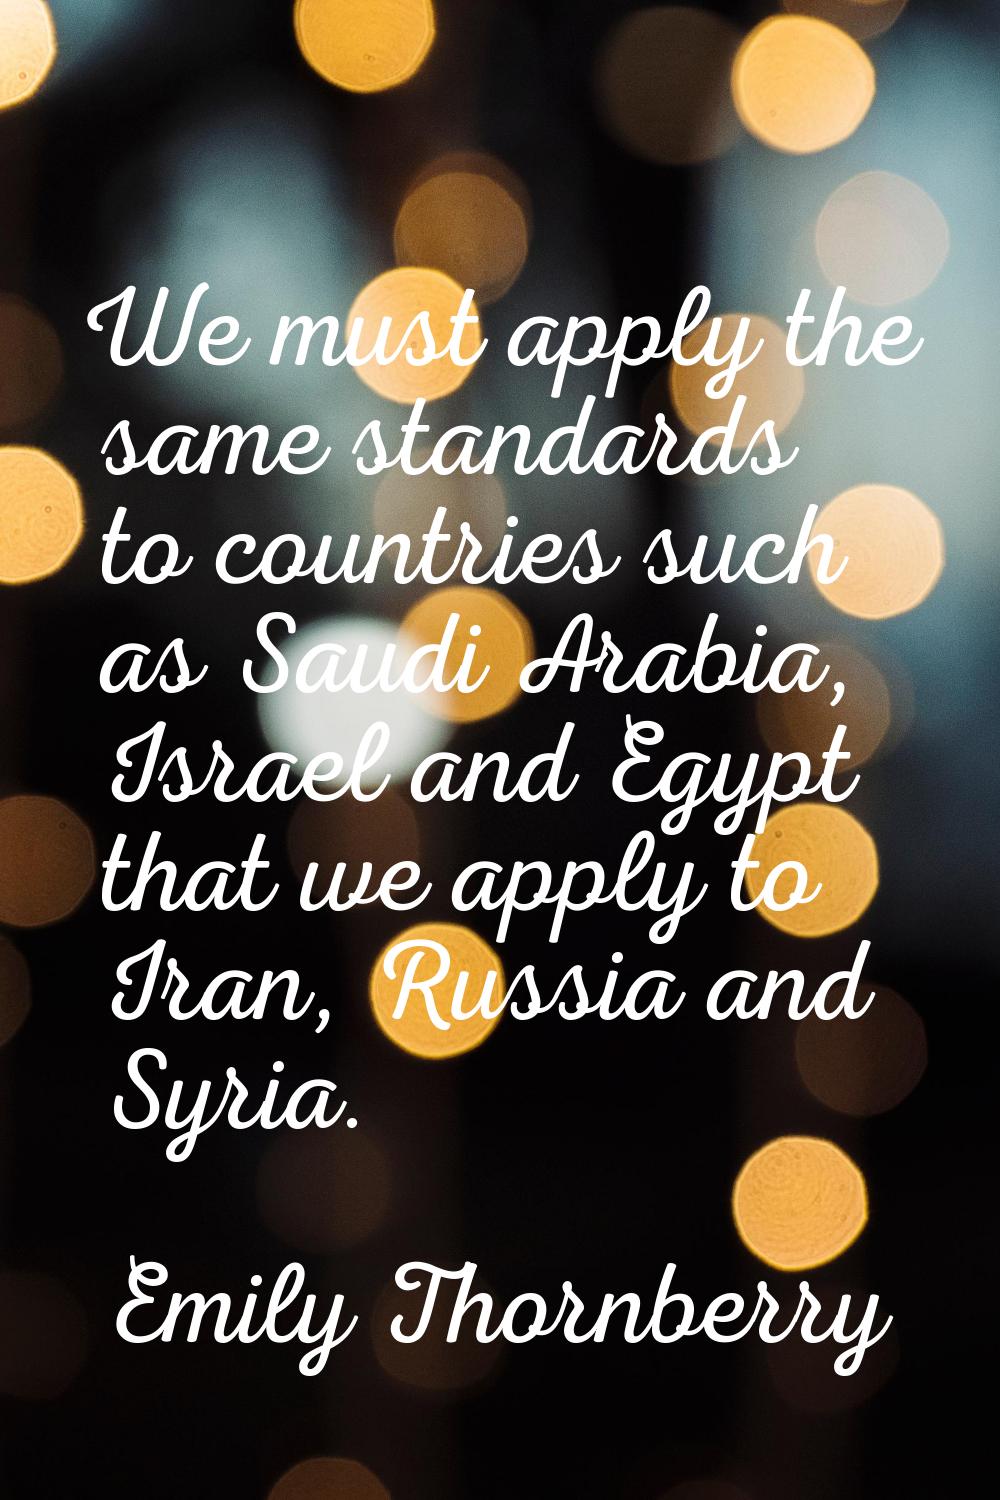 We must apply the same standards to countries such as Saudi Arabia, Israel and Egypt that we apply 